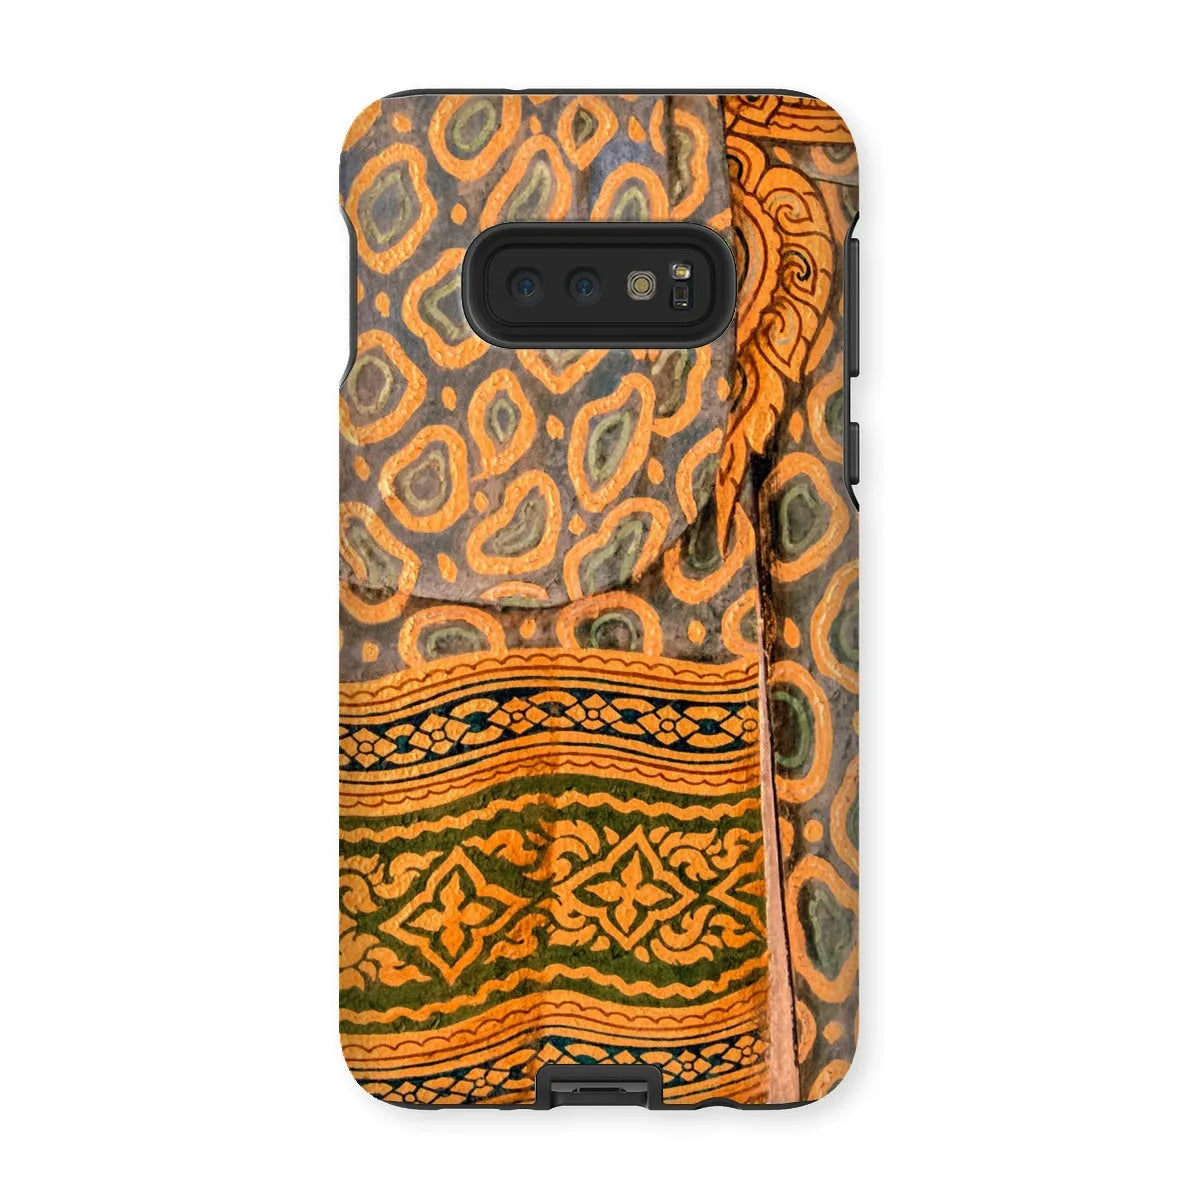 Lady In Waiting - Thai Aesthetic Art Phone Case - Samsung Galaxy S10e / Matte - Mobile Phone Cases - Aesthetic Art